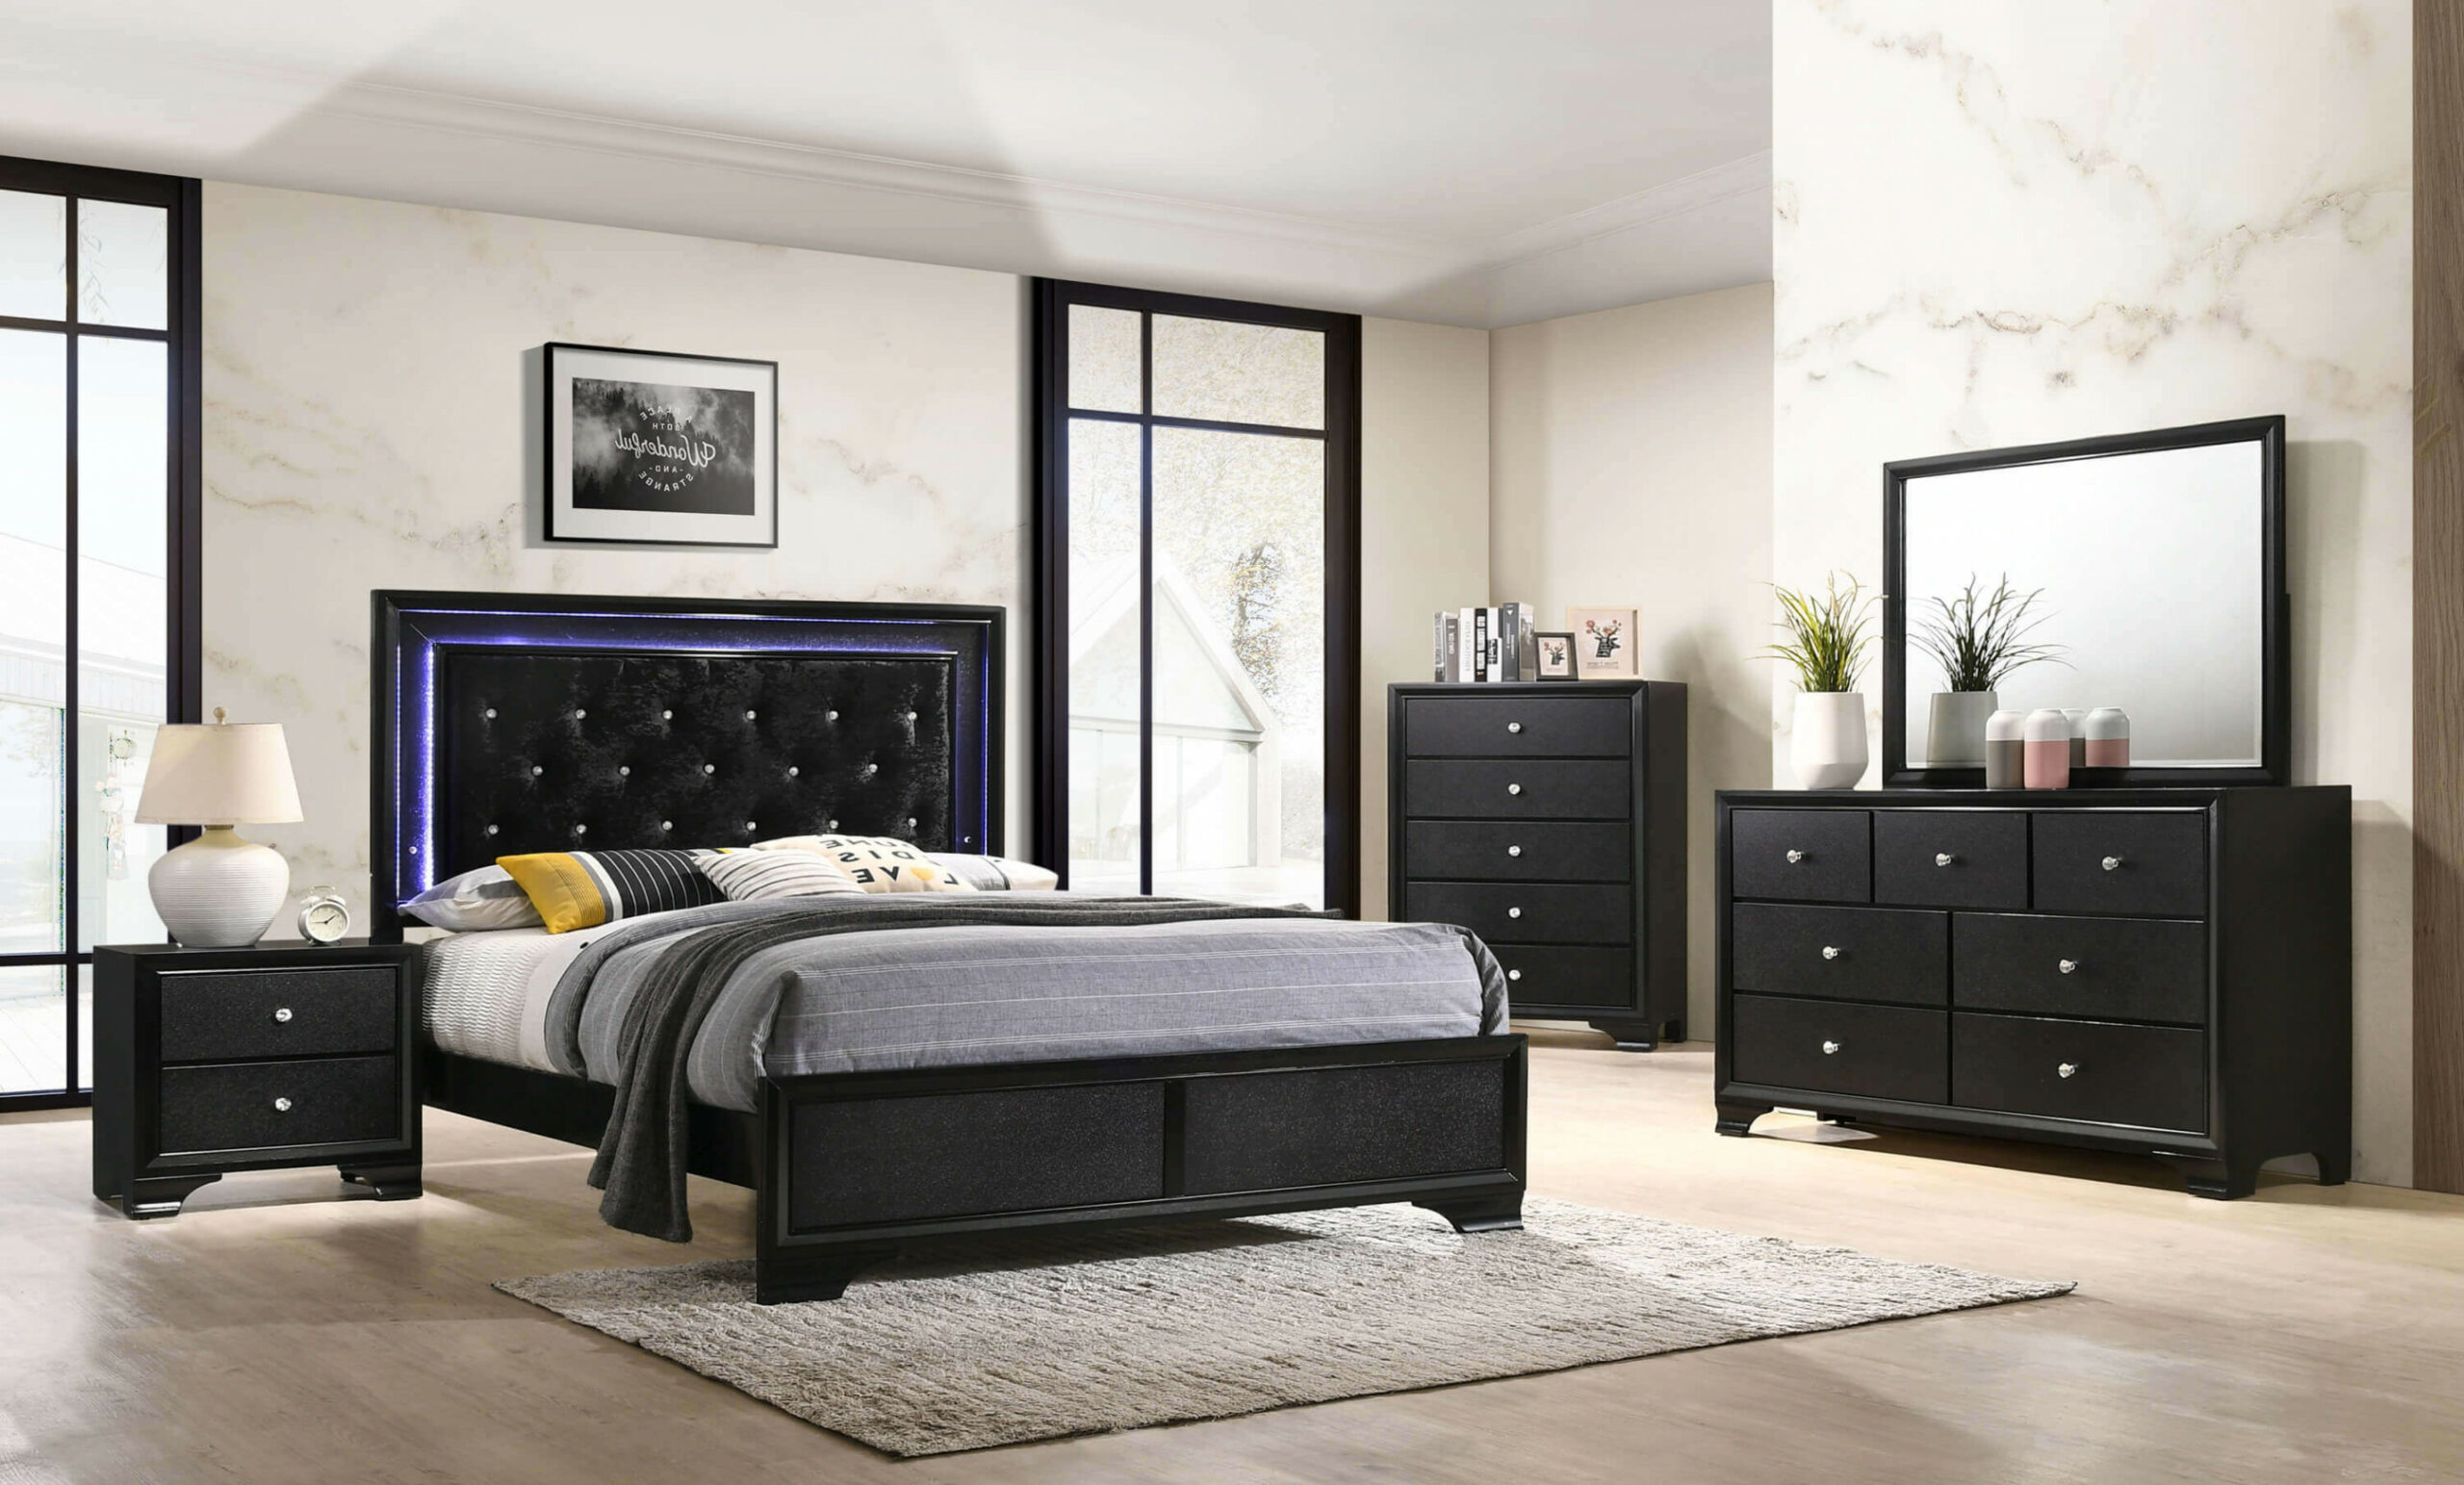 Queen Bedroom Set With Lights In Headboard Cheap Sale, SAVE %.